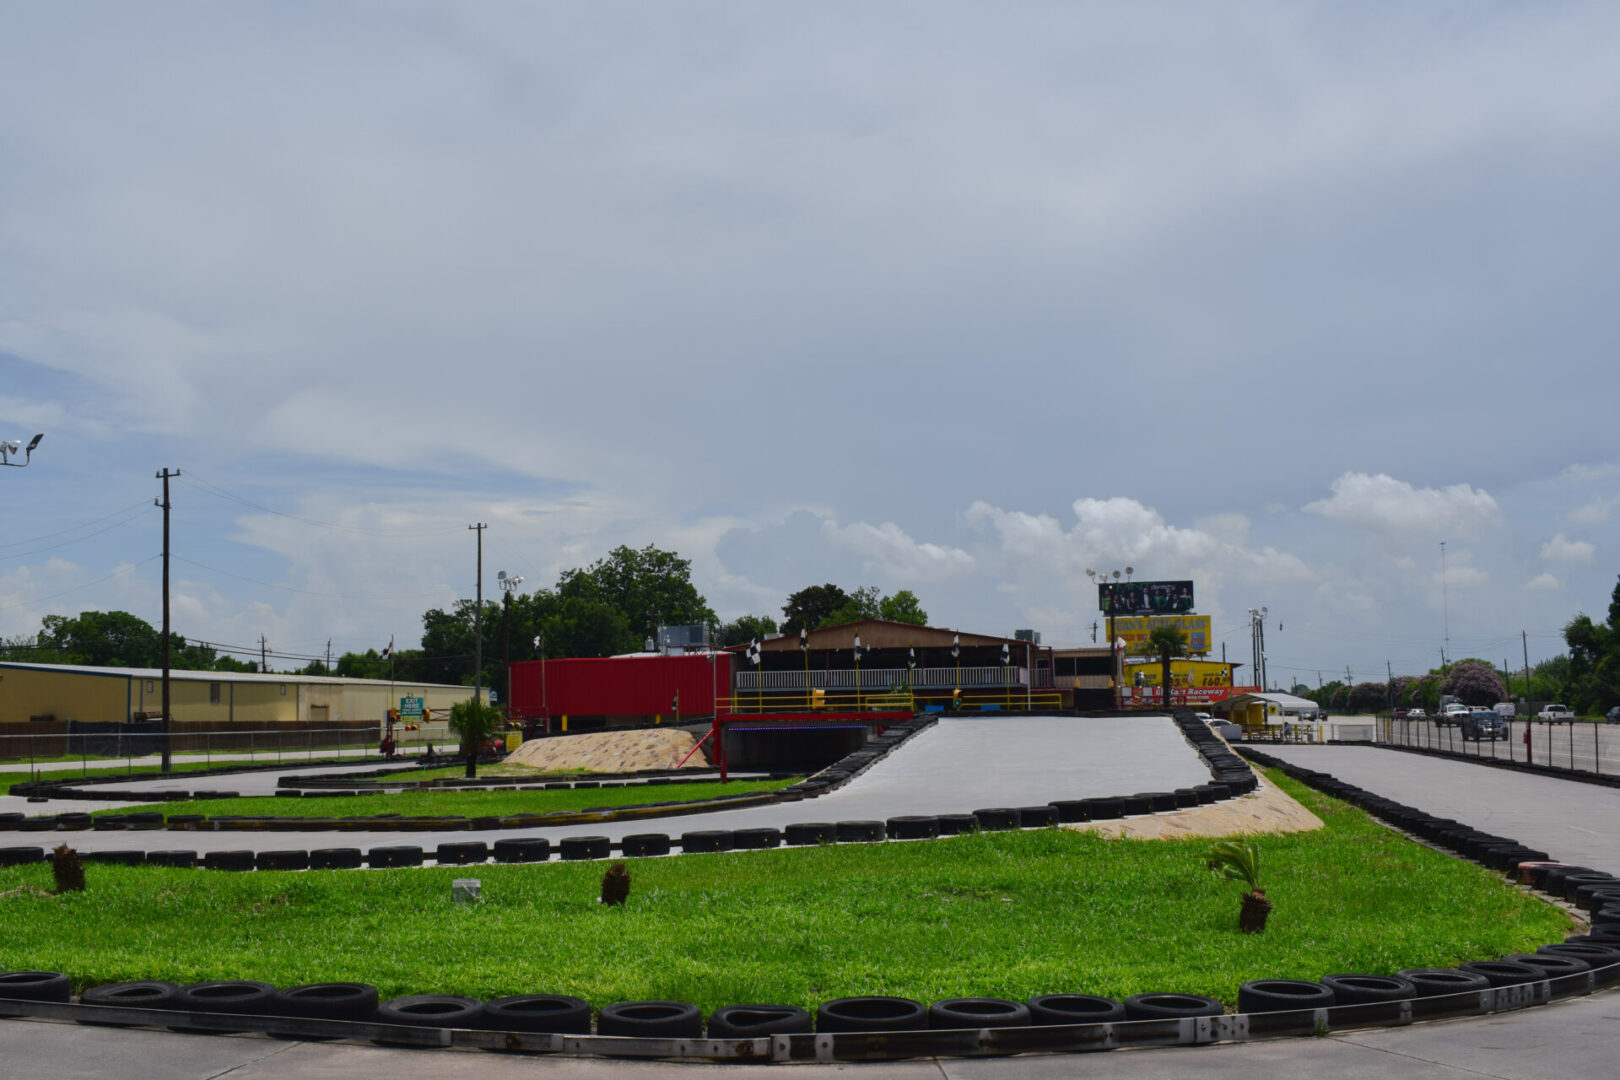 Photo showcasing track and arena for Go-kart riding